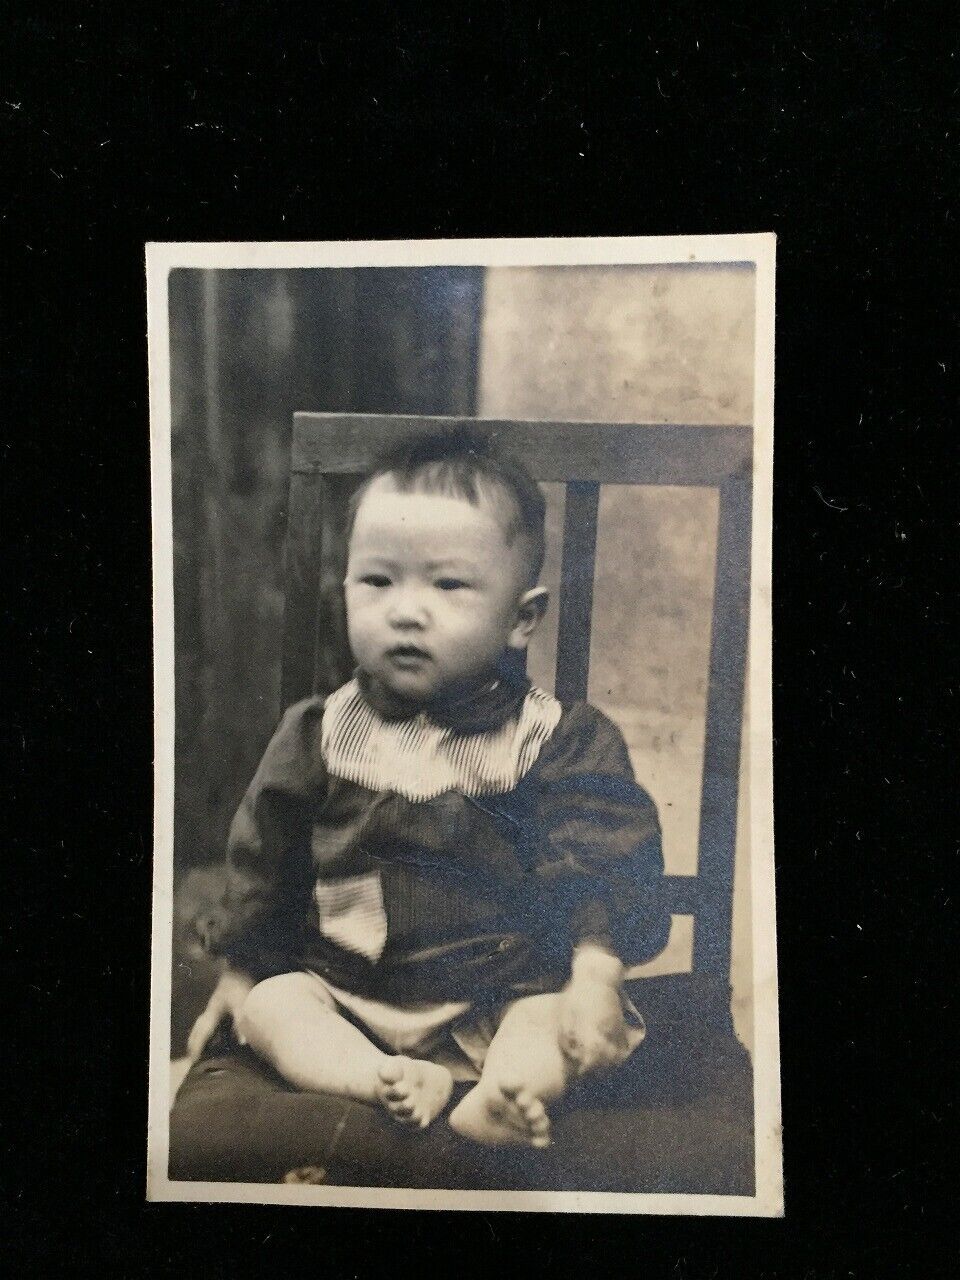 #10025 Japanese Vintage Photo 1940s / sitting baby chair room